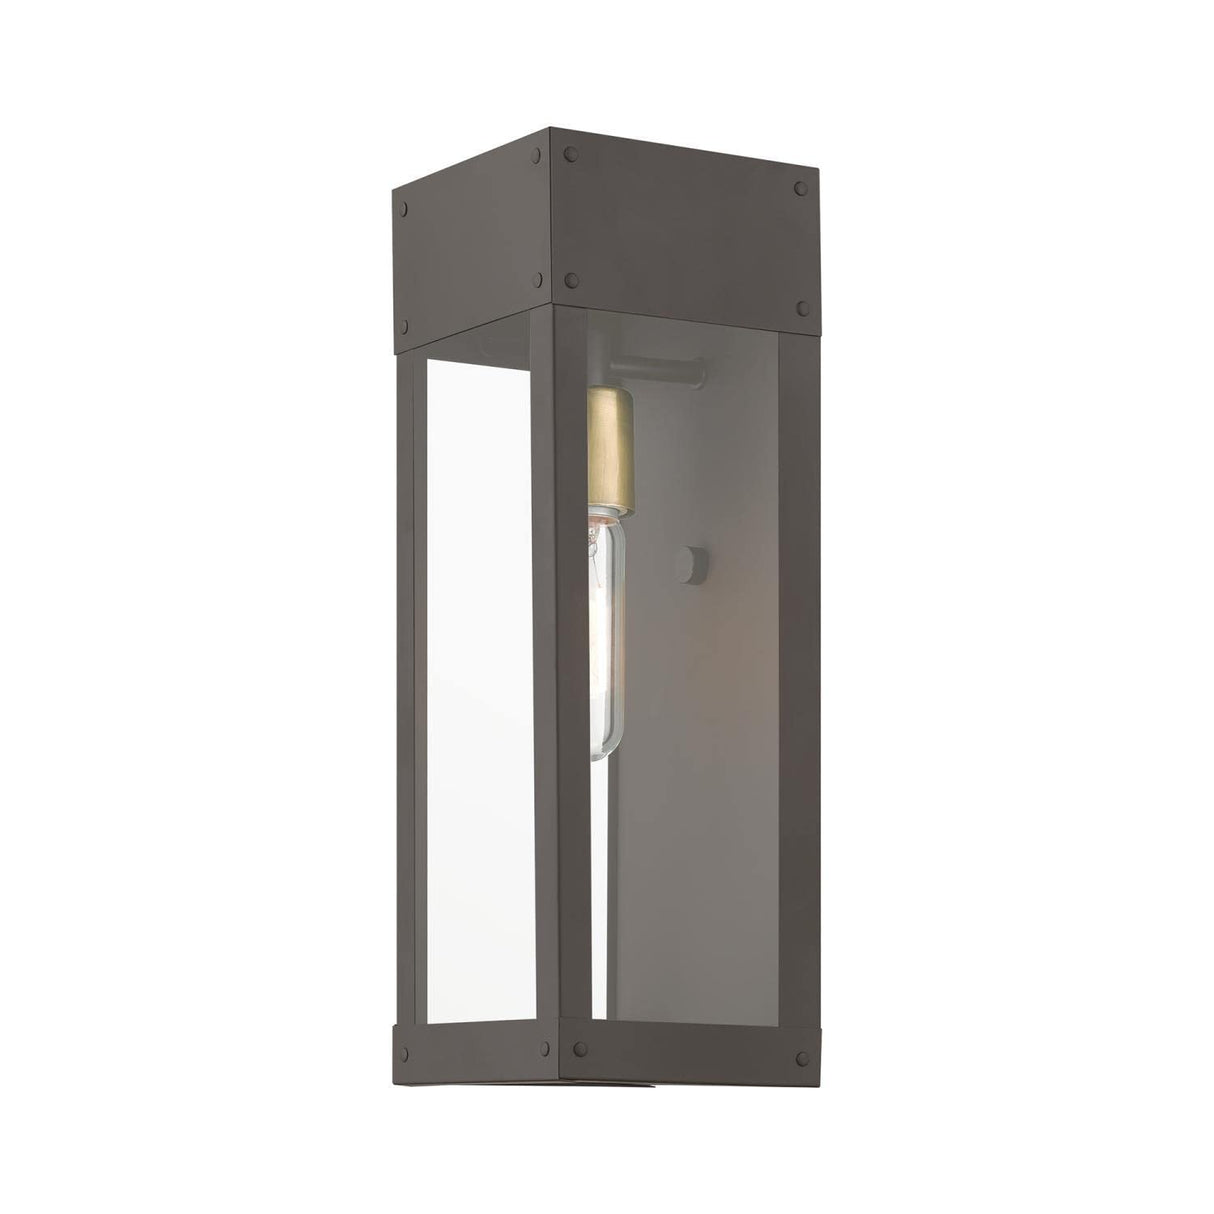 Barrett 1 Light Outdoor Sconce in Bronze with Antique Brass Candle (20873-07)